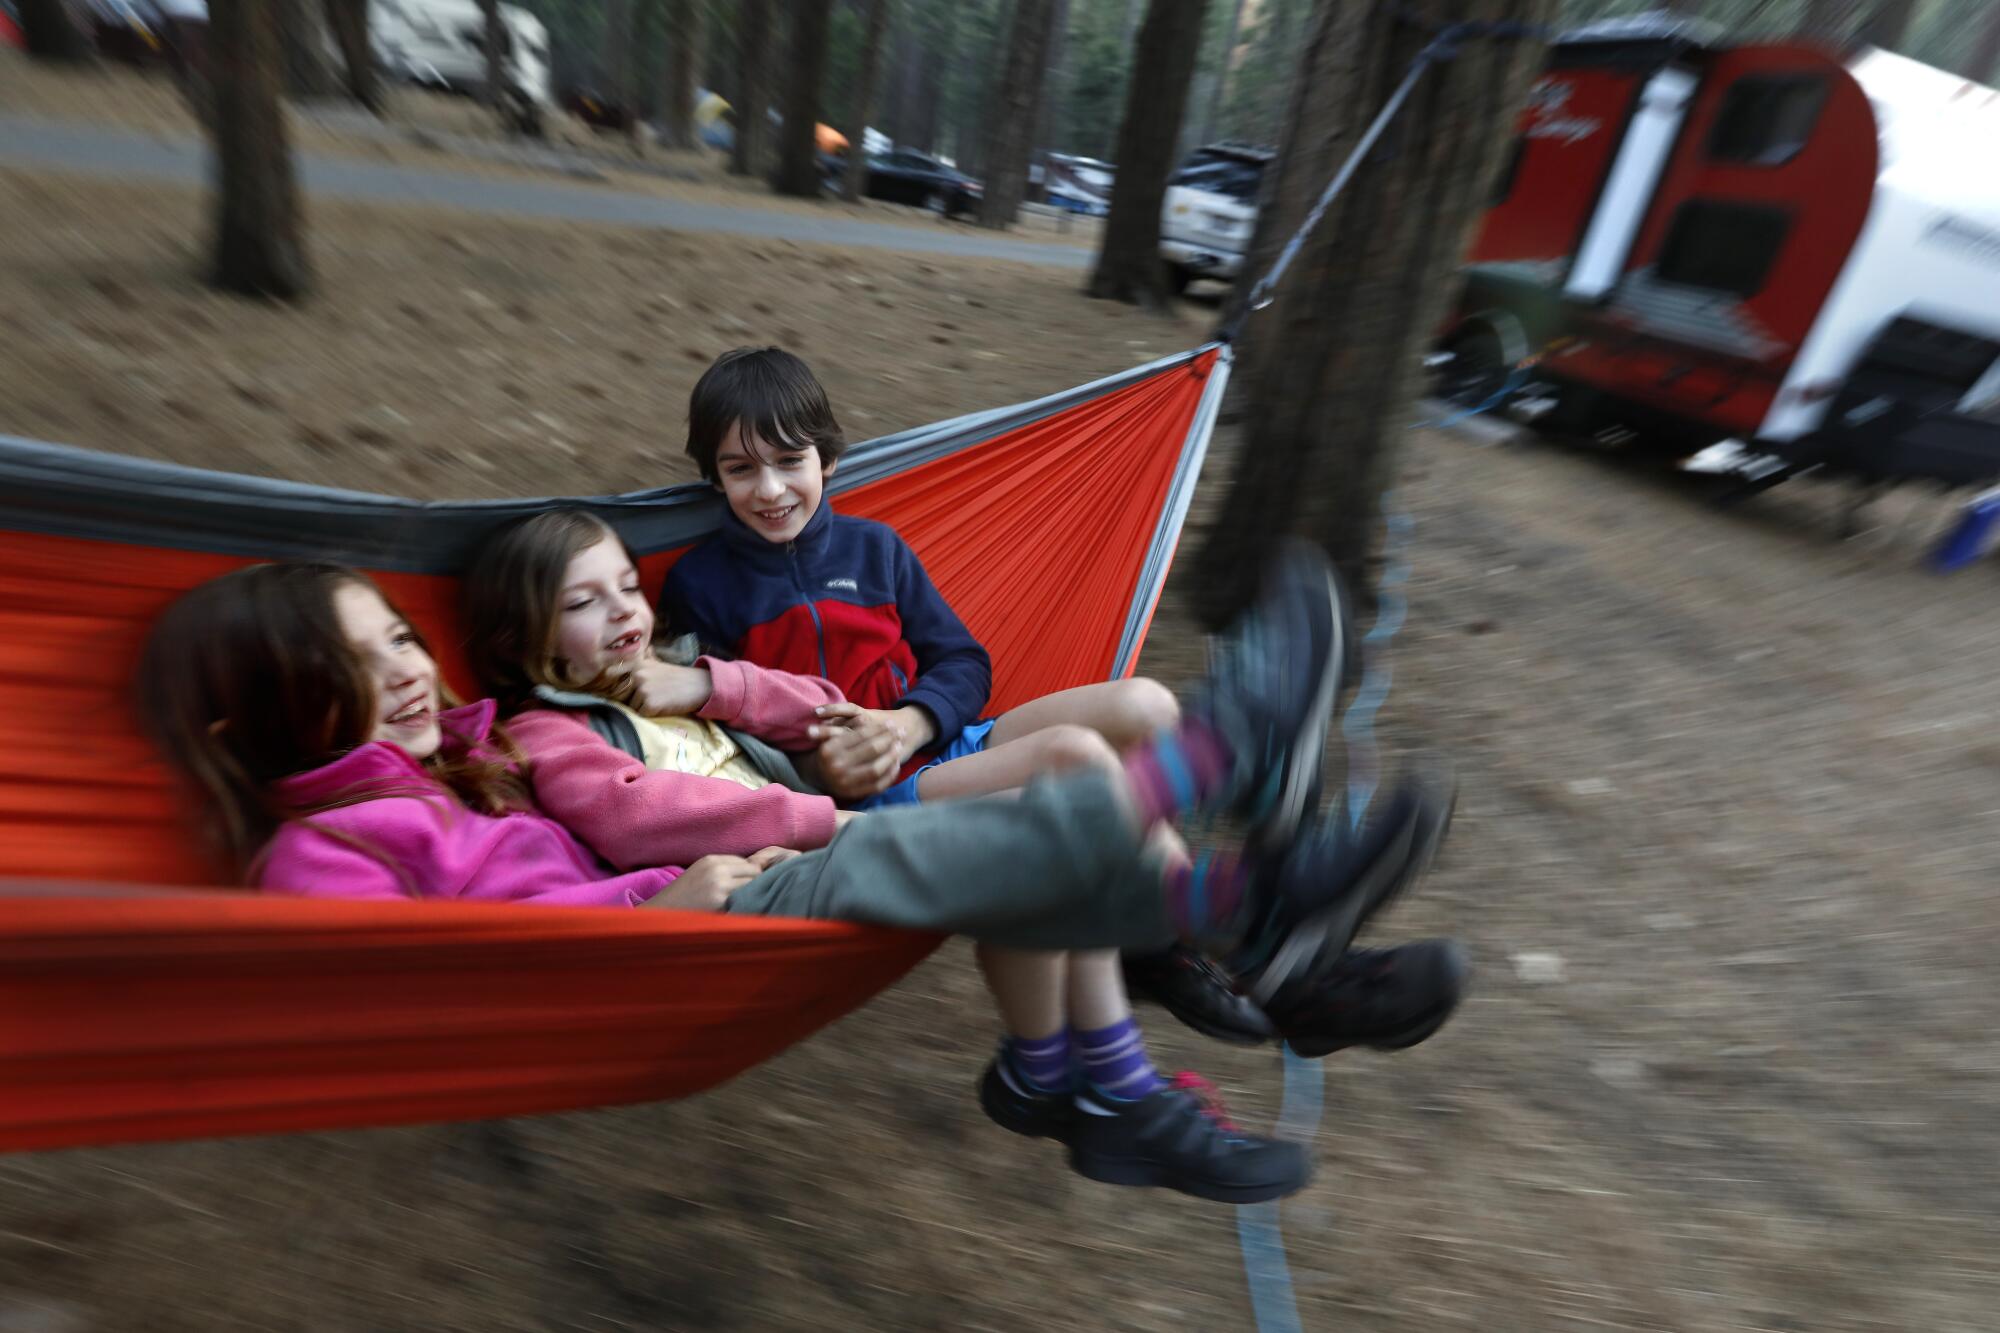 Three young children swing in a red hammock